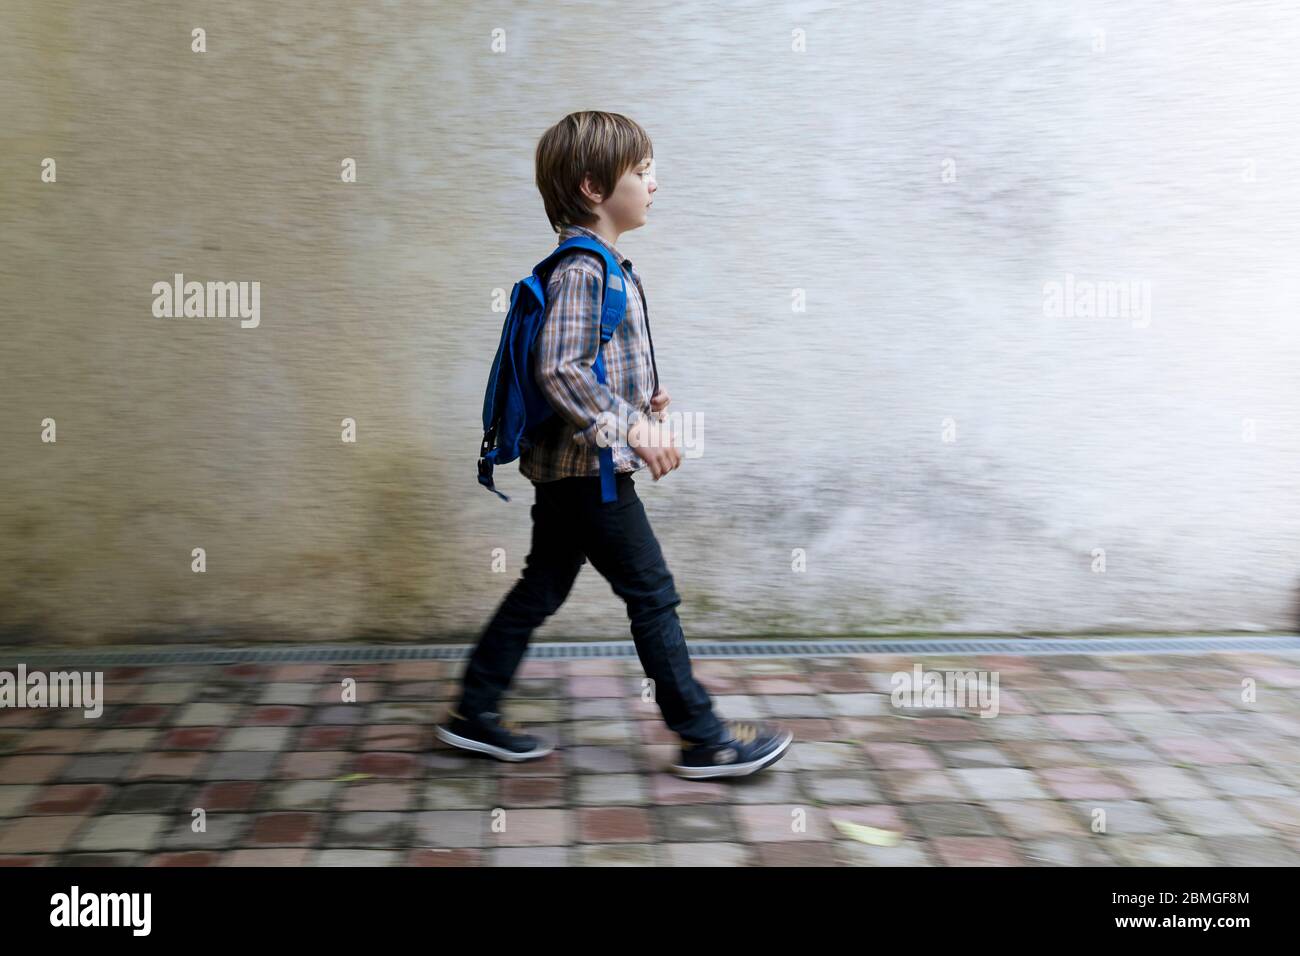 Coronavirus outbreak, Covid-19: illustration on the reopening of schools. Schoolboy going to school with a backpack on April 30, 2020 Stock Photo